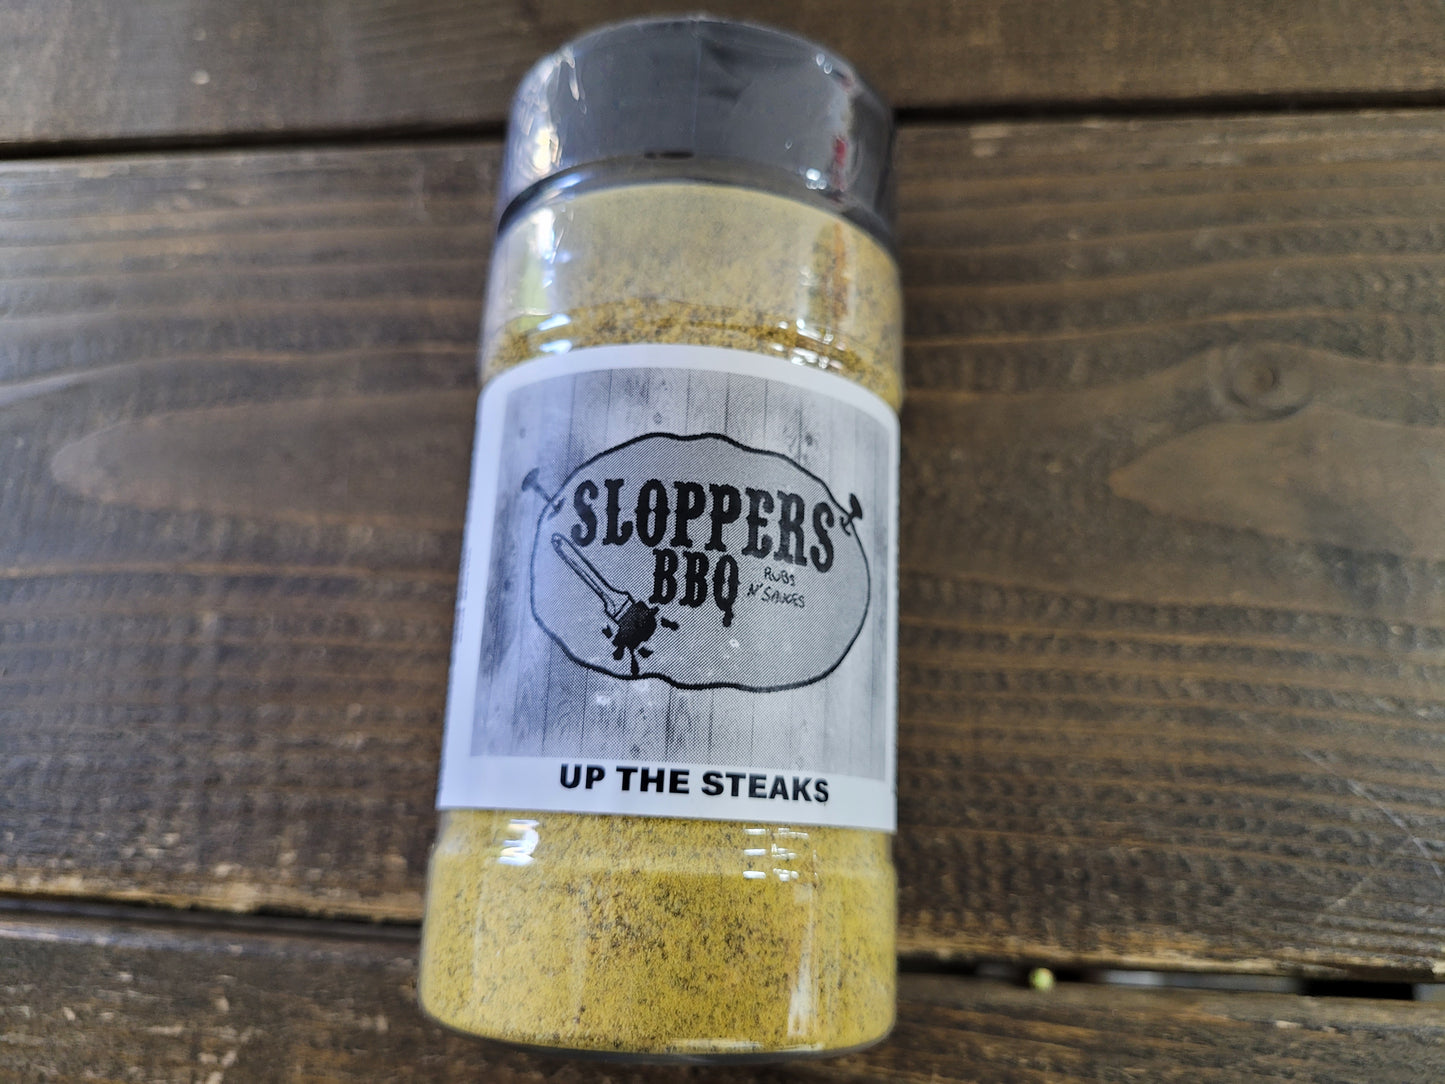 Up the Steaks - Slopper's BBQ